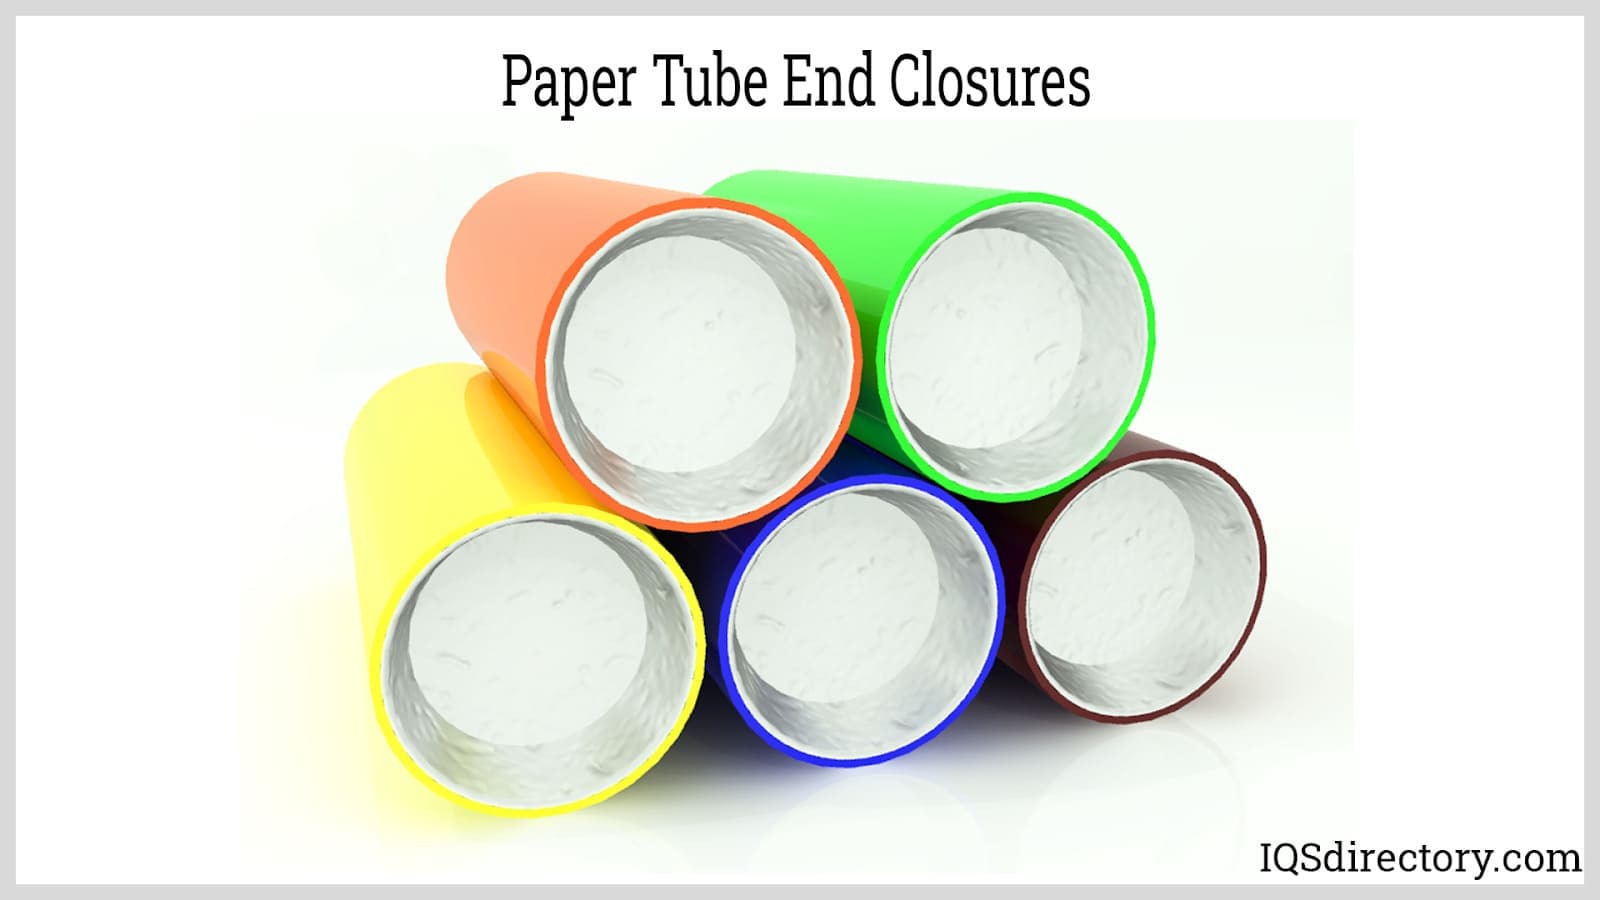 Paper Tube End Closures